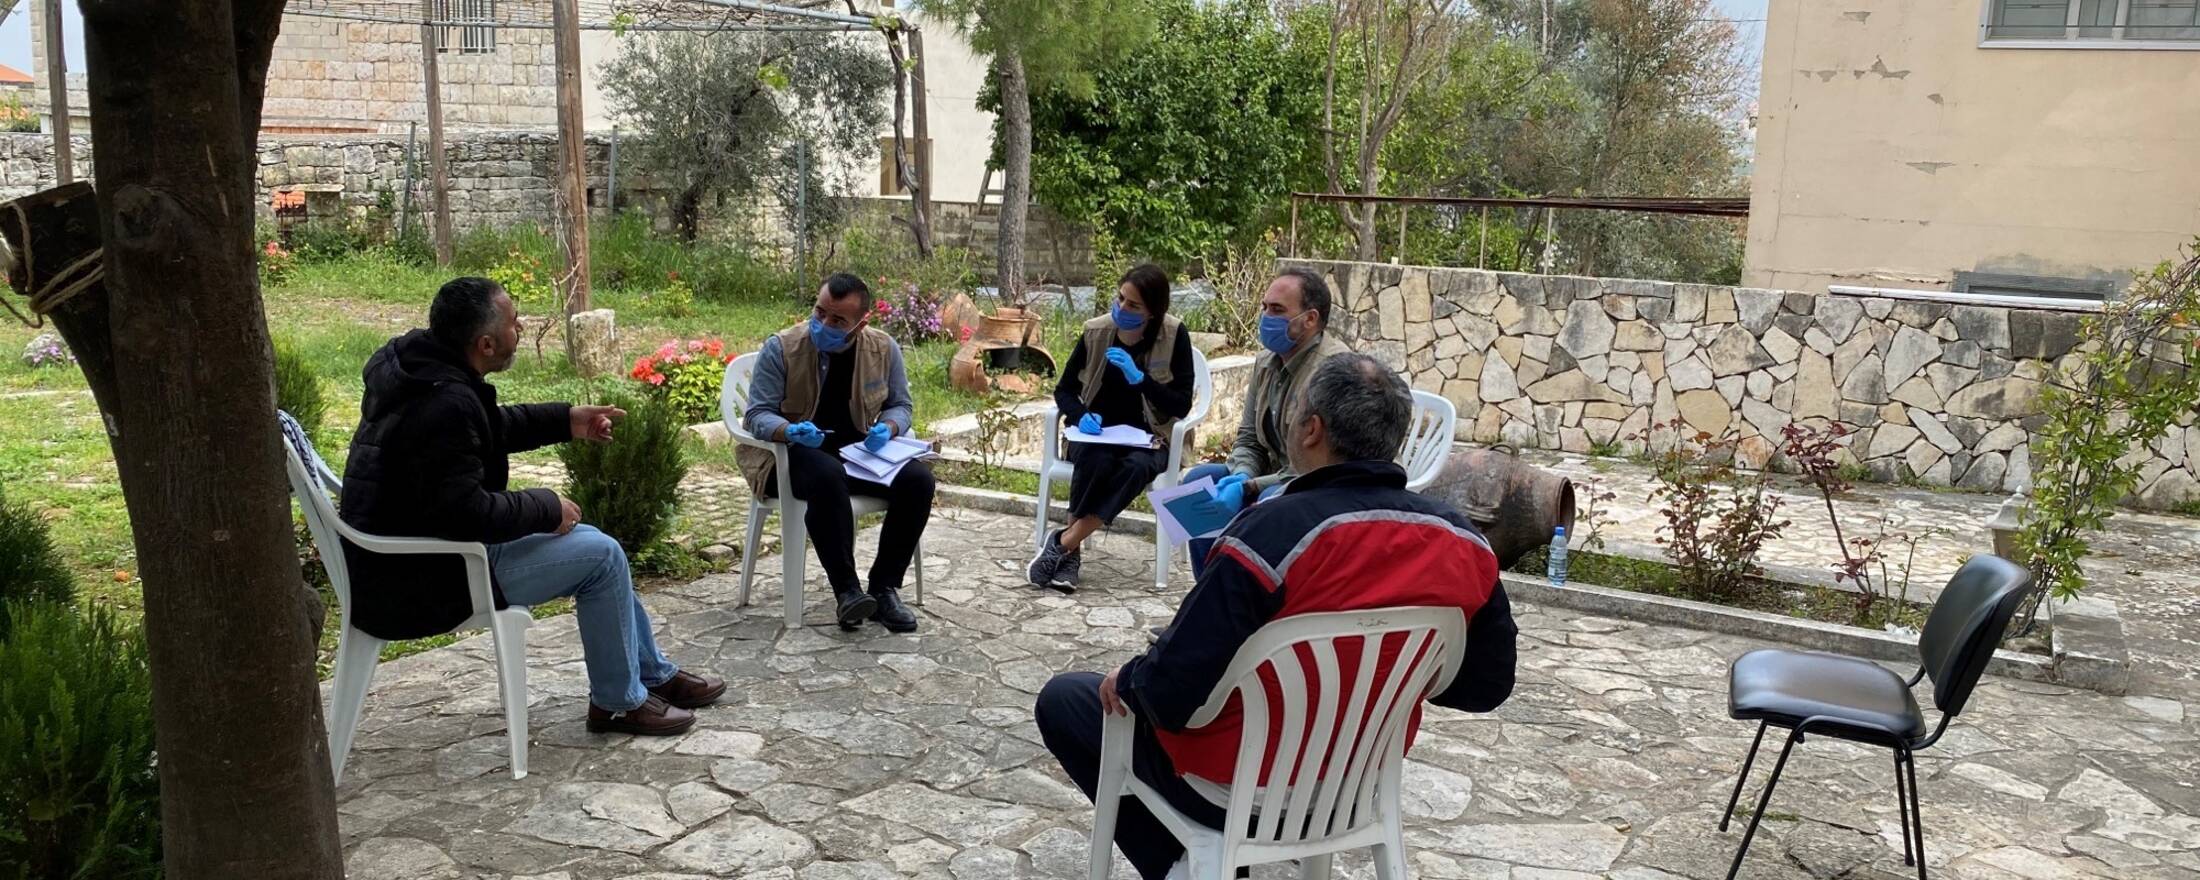 STORY: UN-Habitat supports municipalities with a rapid assessment of COVID-19 challenges in Lebanon